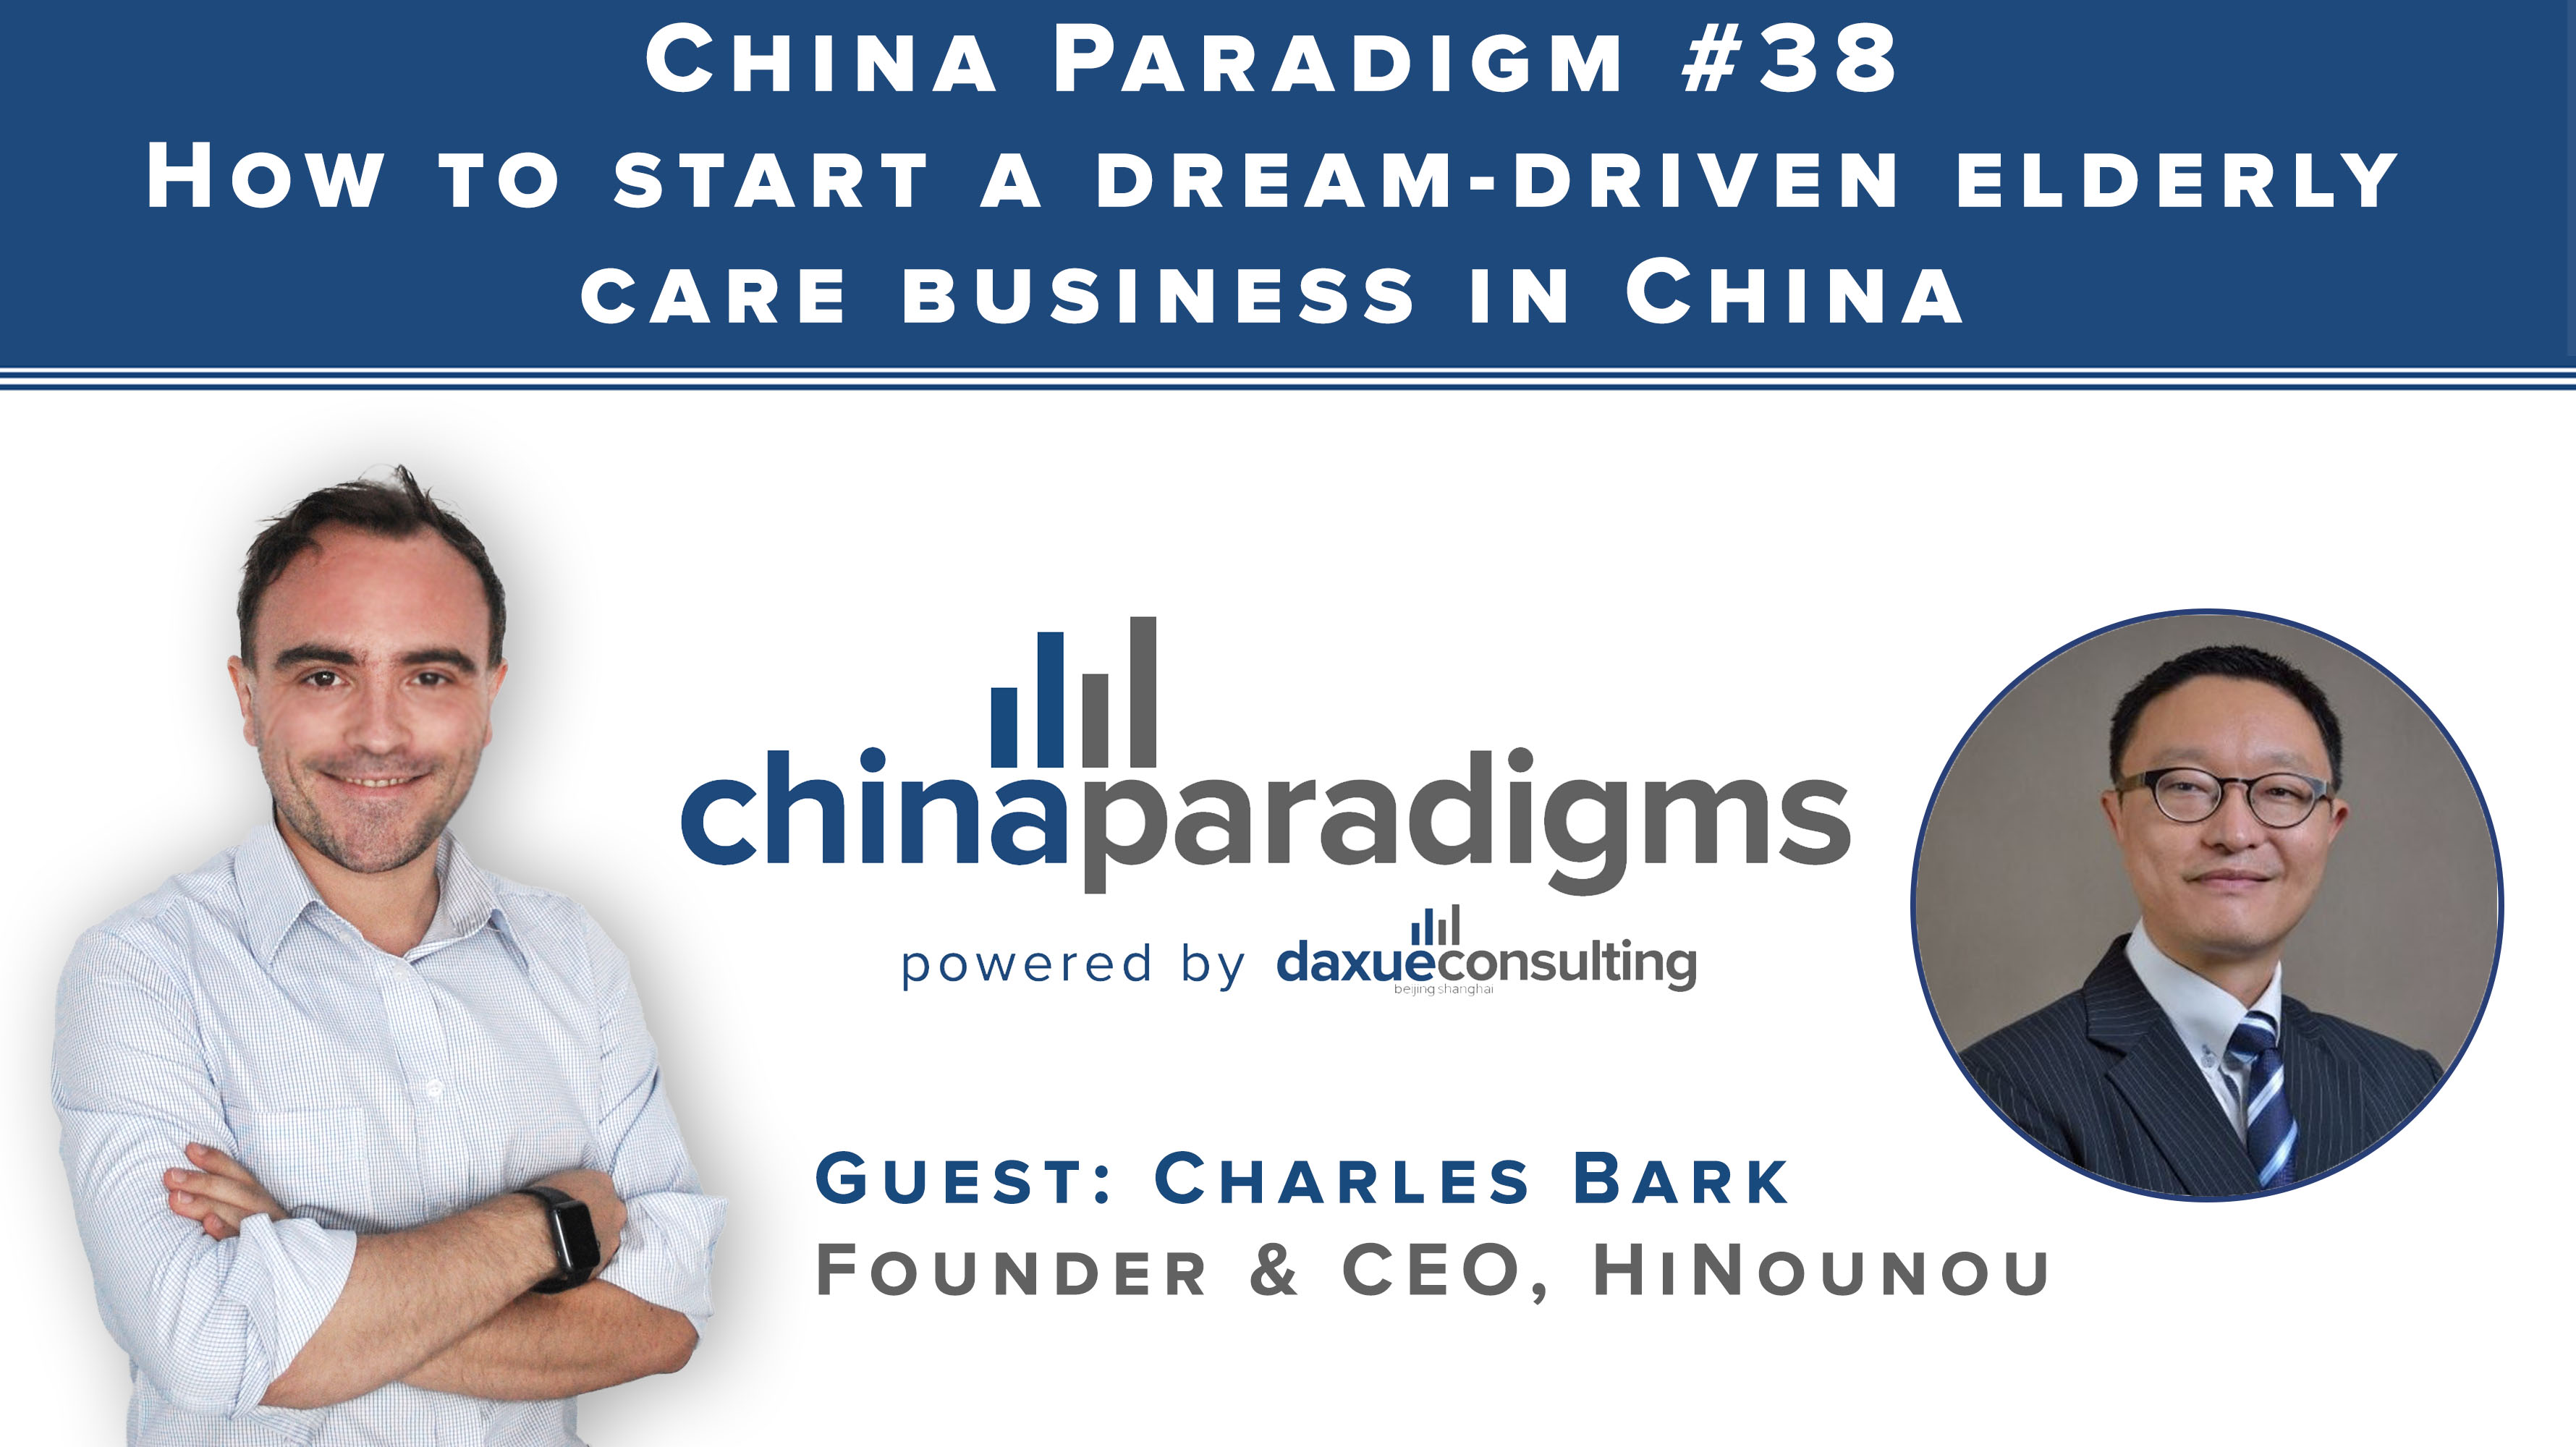 [Podcast] China Paradigm 38: How to start a dream driven elderly care business in China